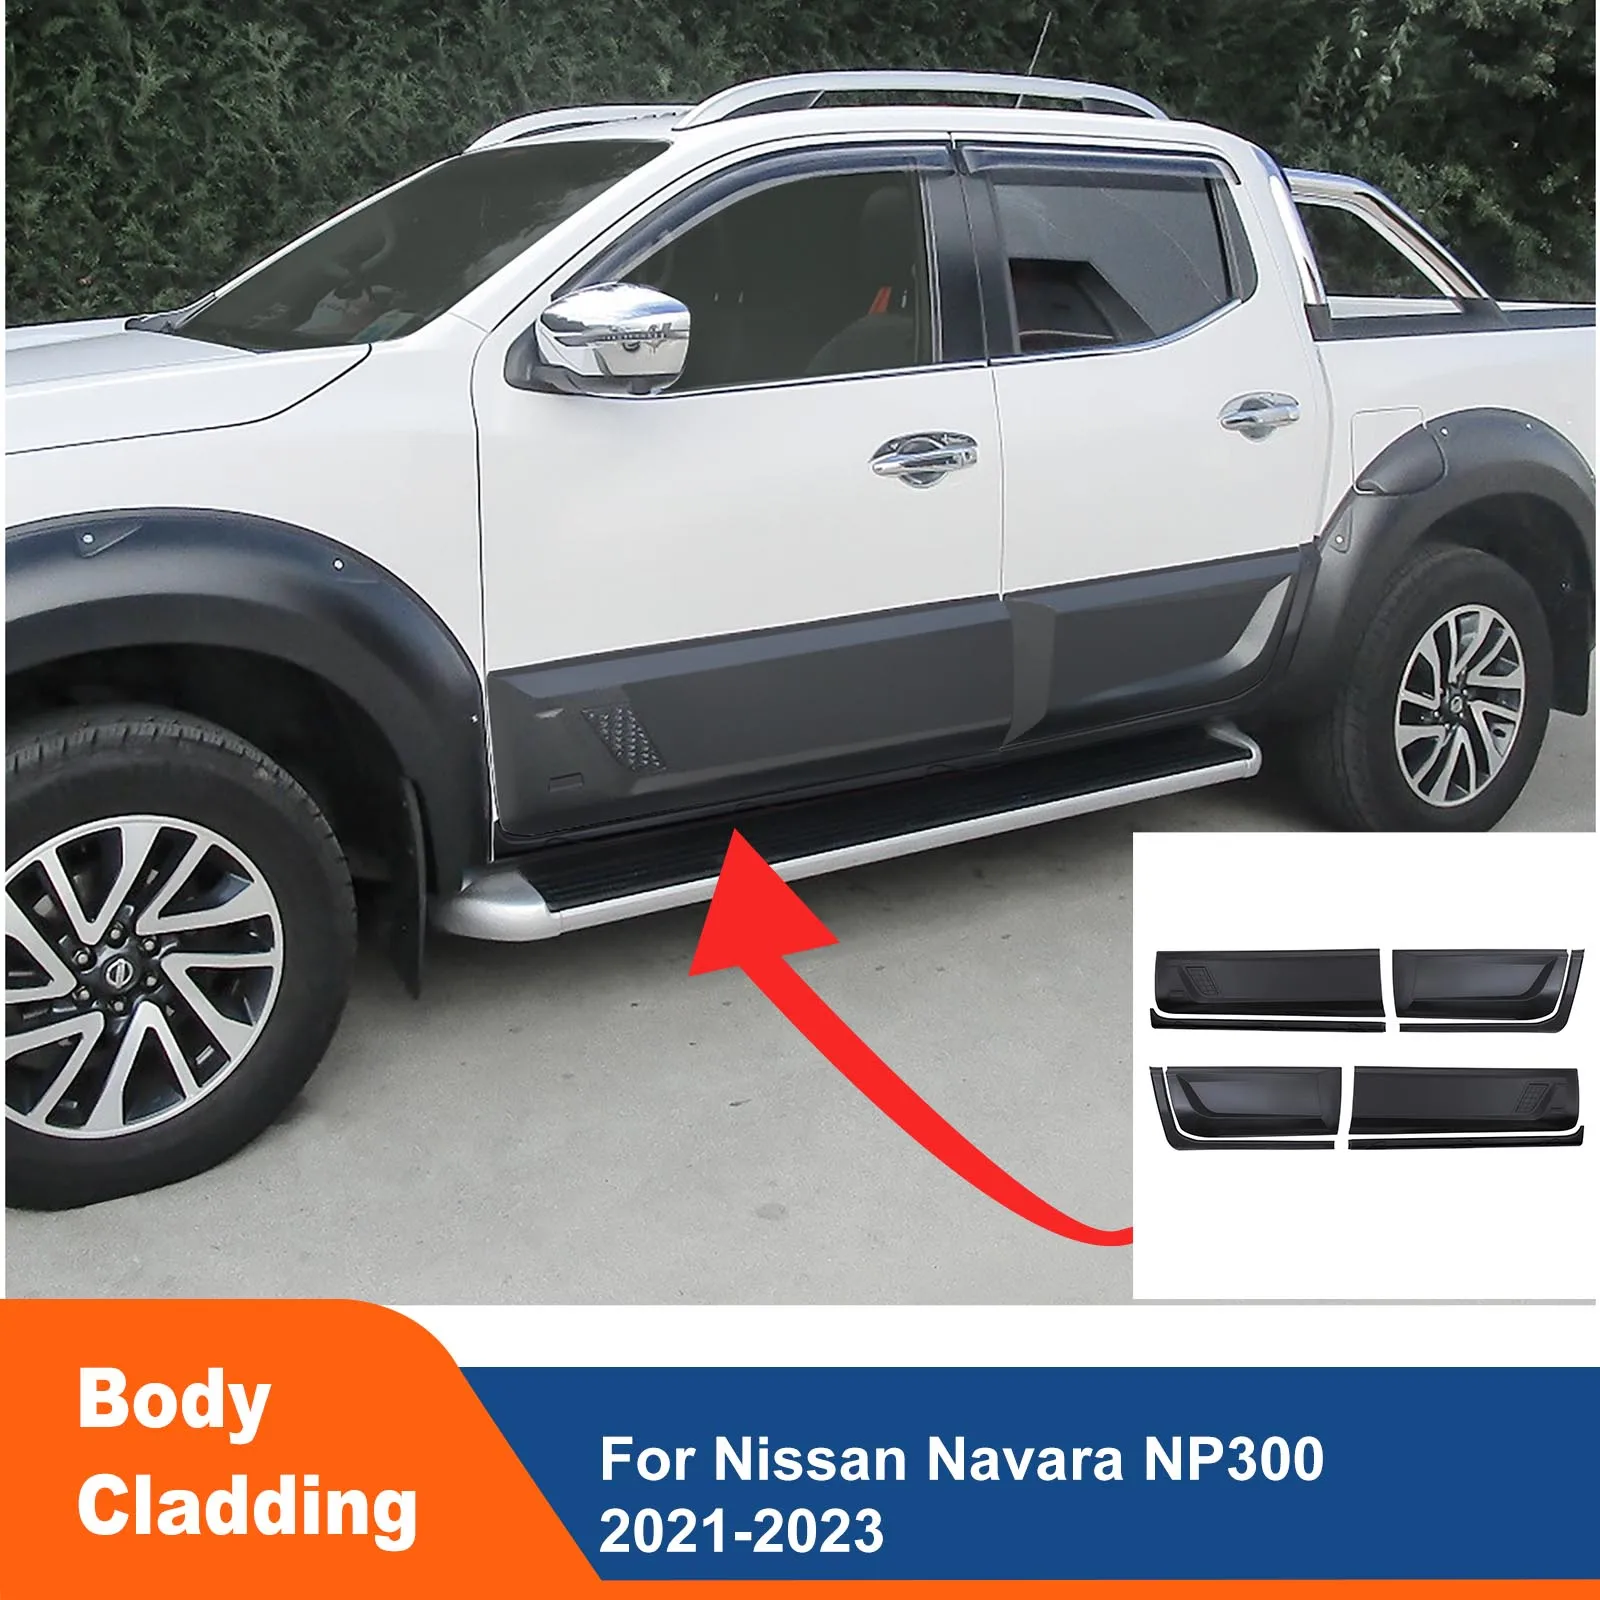 

Body Cladding Side Guard Matte Black For Nissan Navara NP300 2021 2022 2023 4X4 Car Styling Accessories